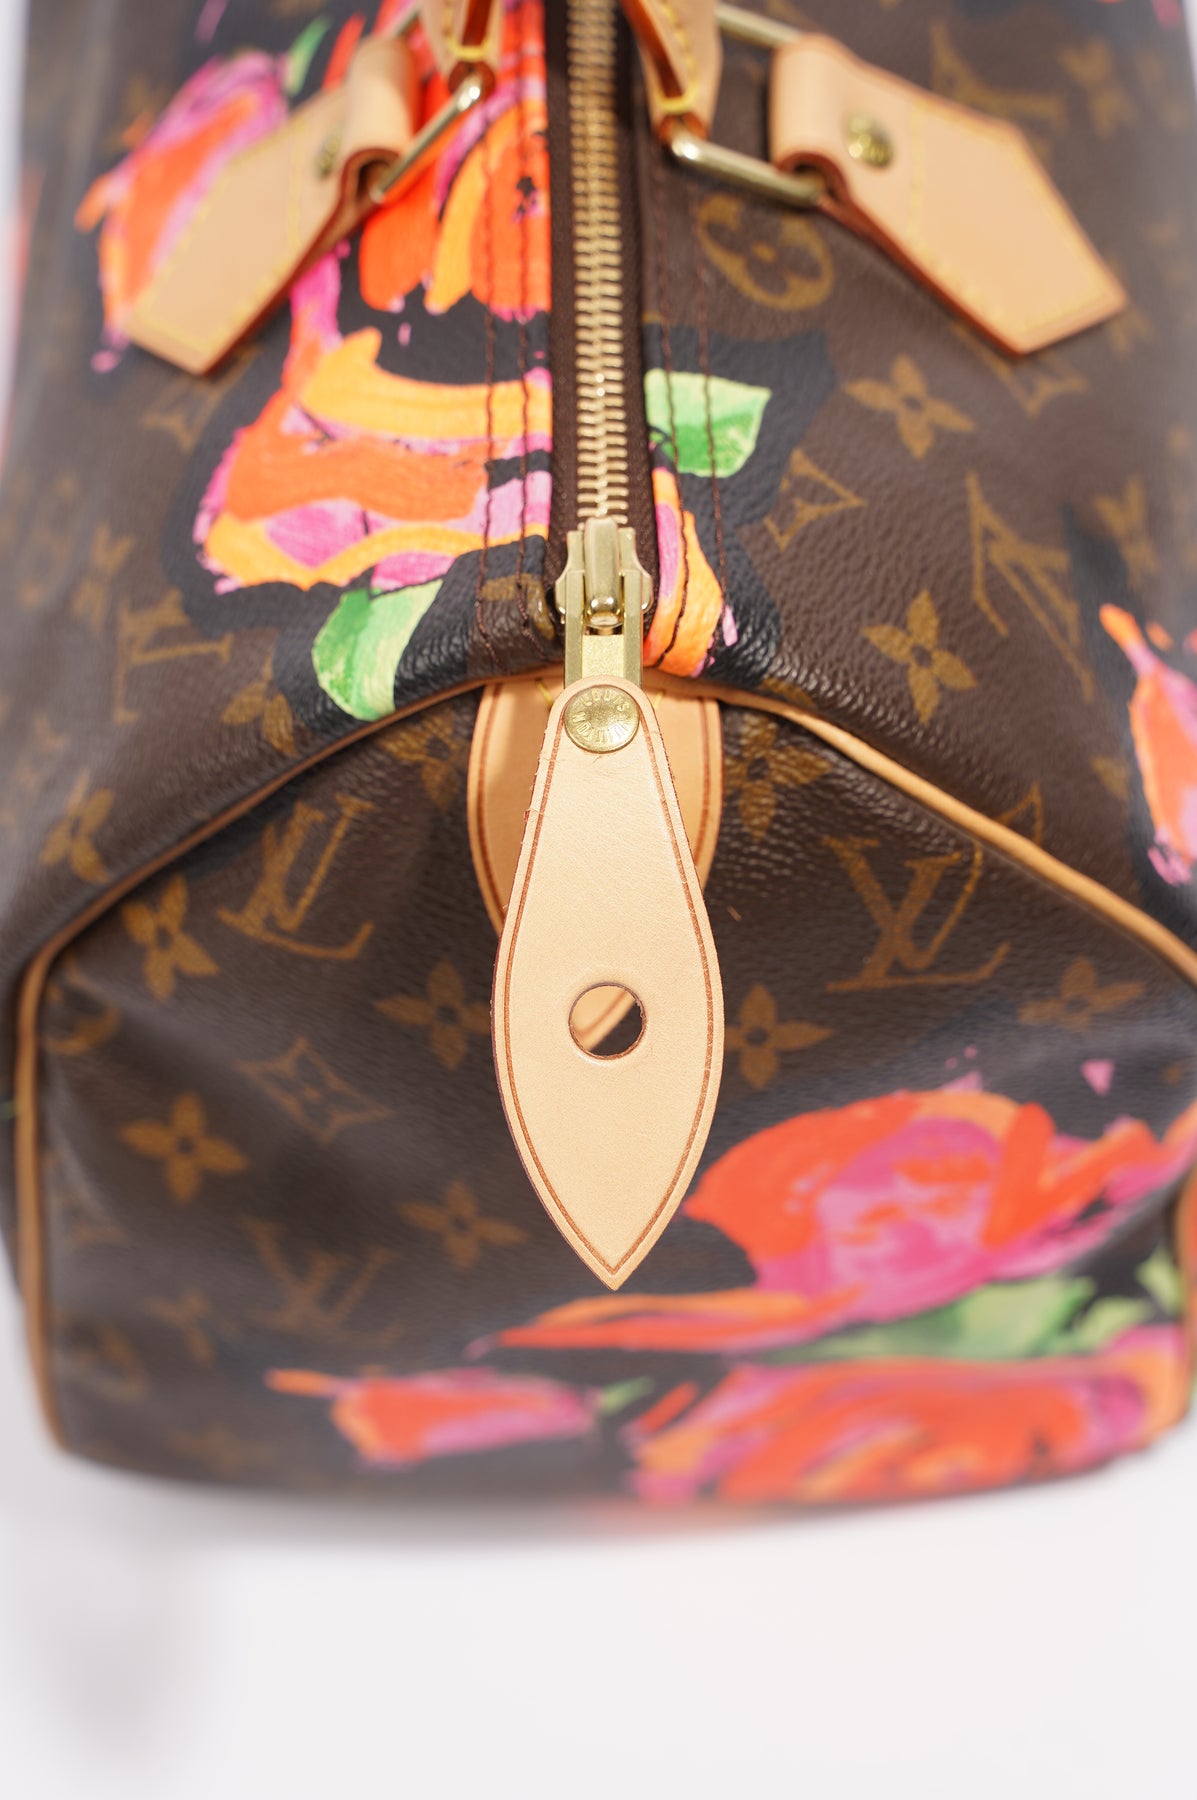 Louis Vuitton Limited Edition “Stephen Sprouse Roses” Speedy